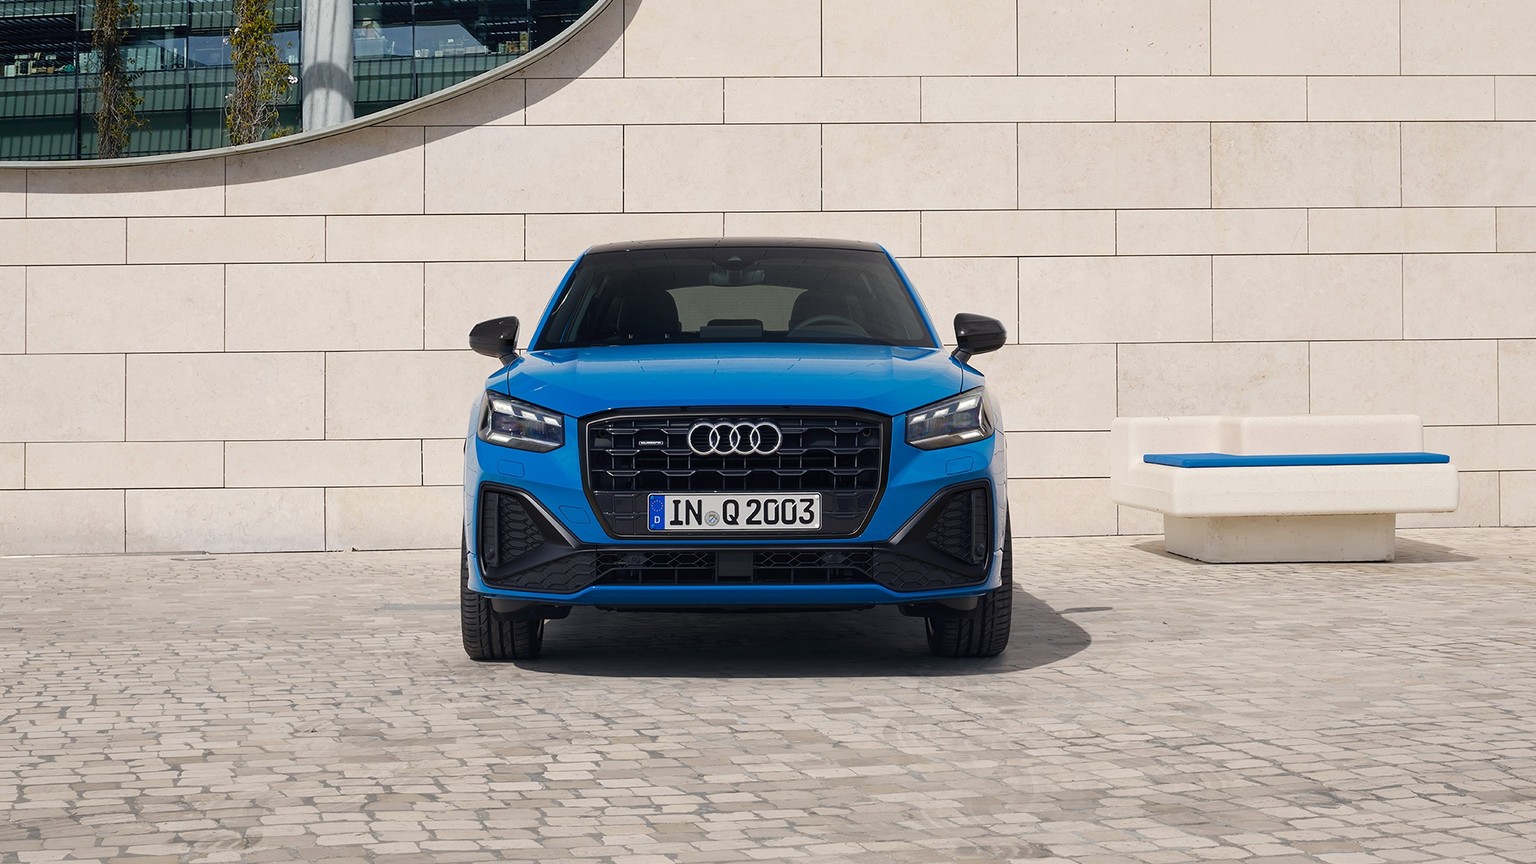 Front view of the Audi Q2